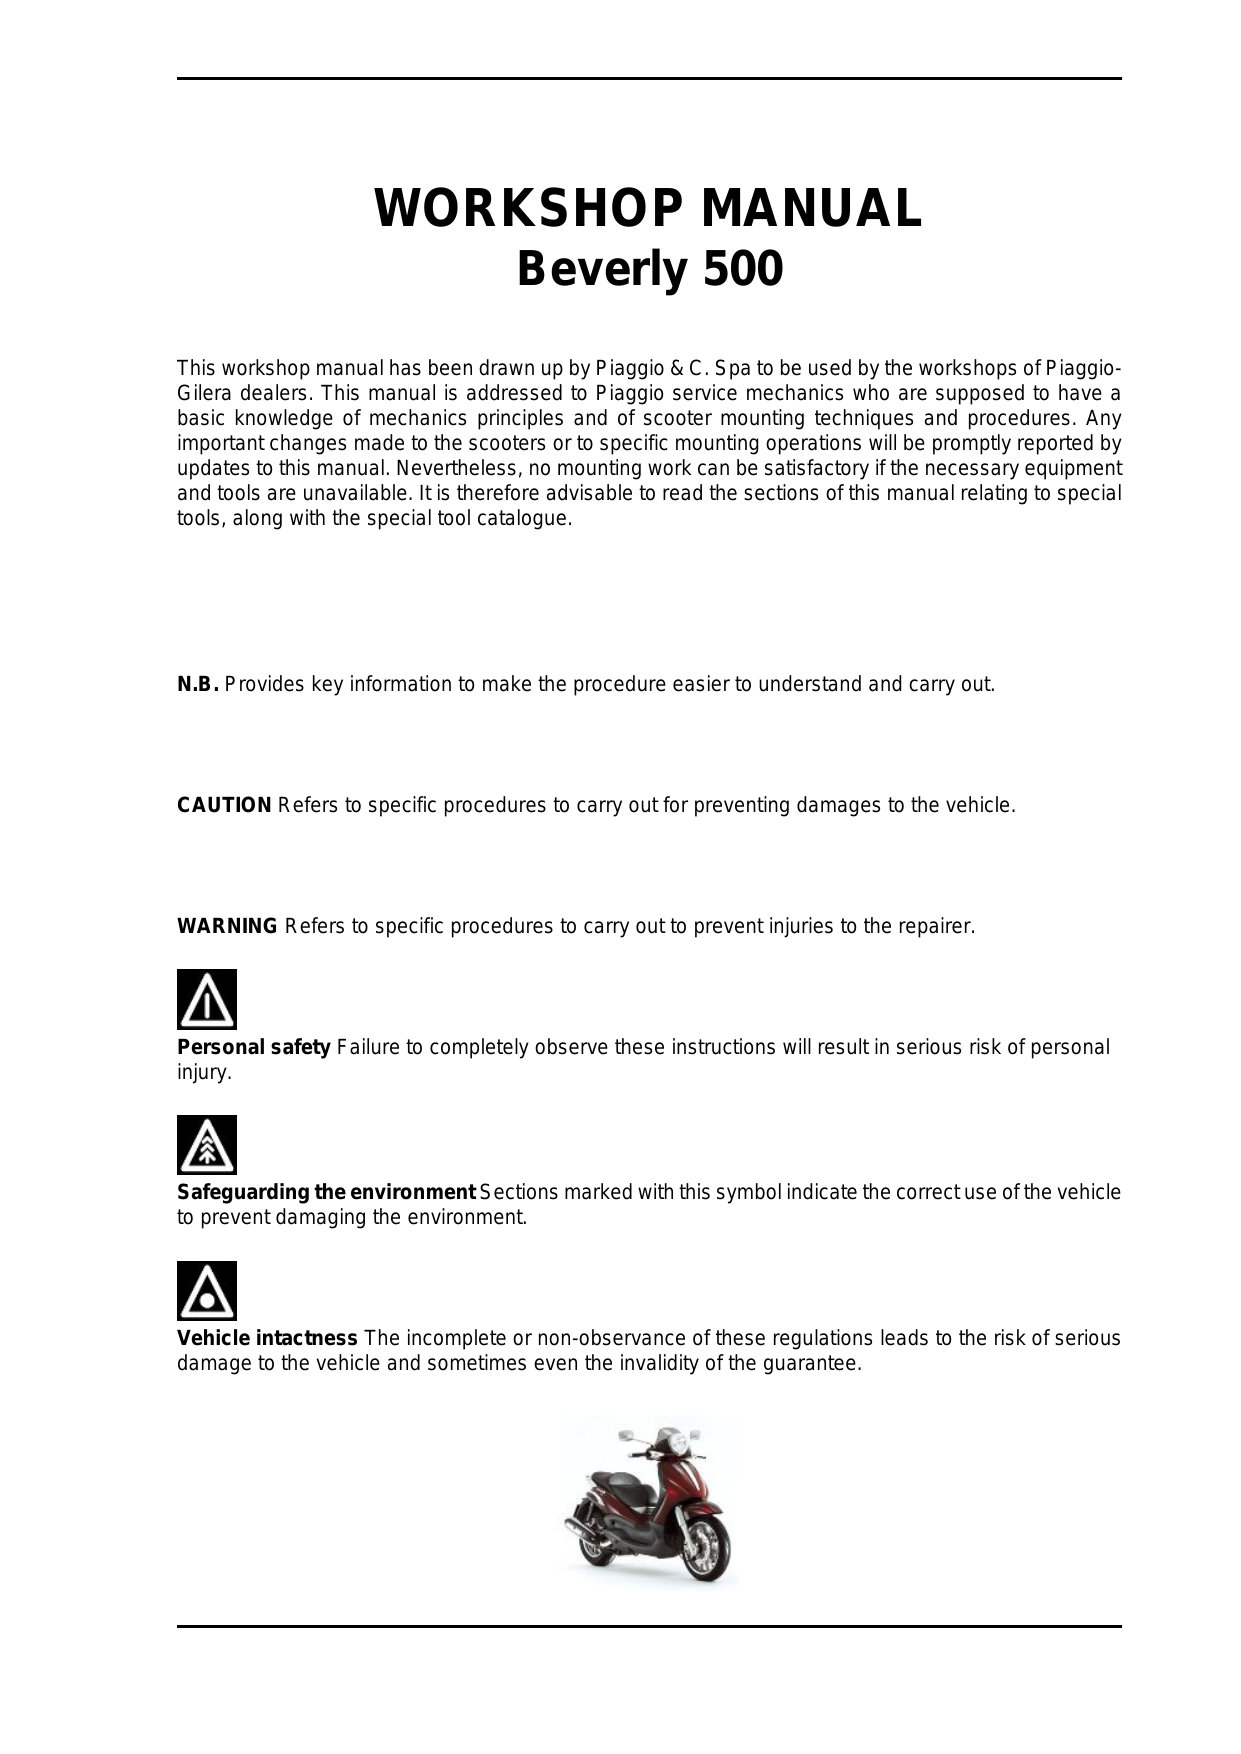 Piaggio Beverly 500 workshop manual Preview image 3